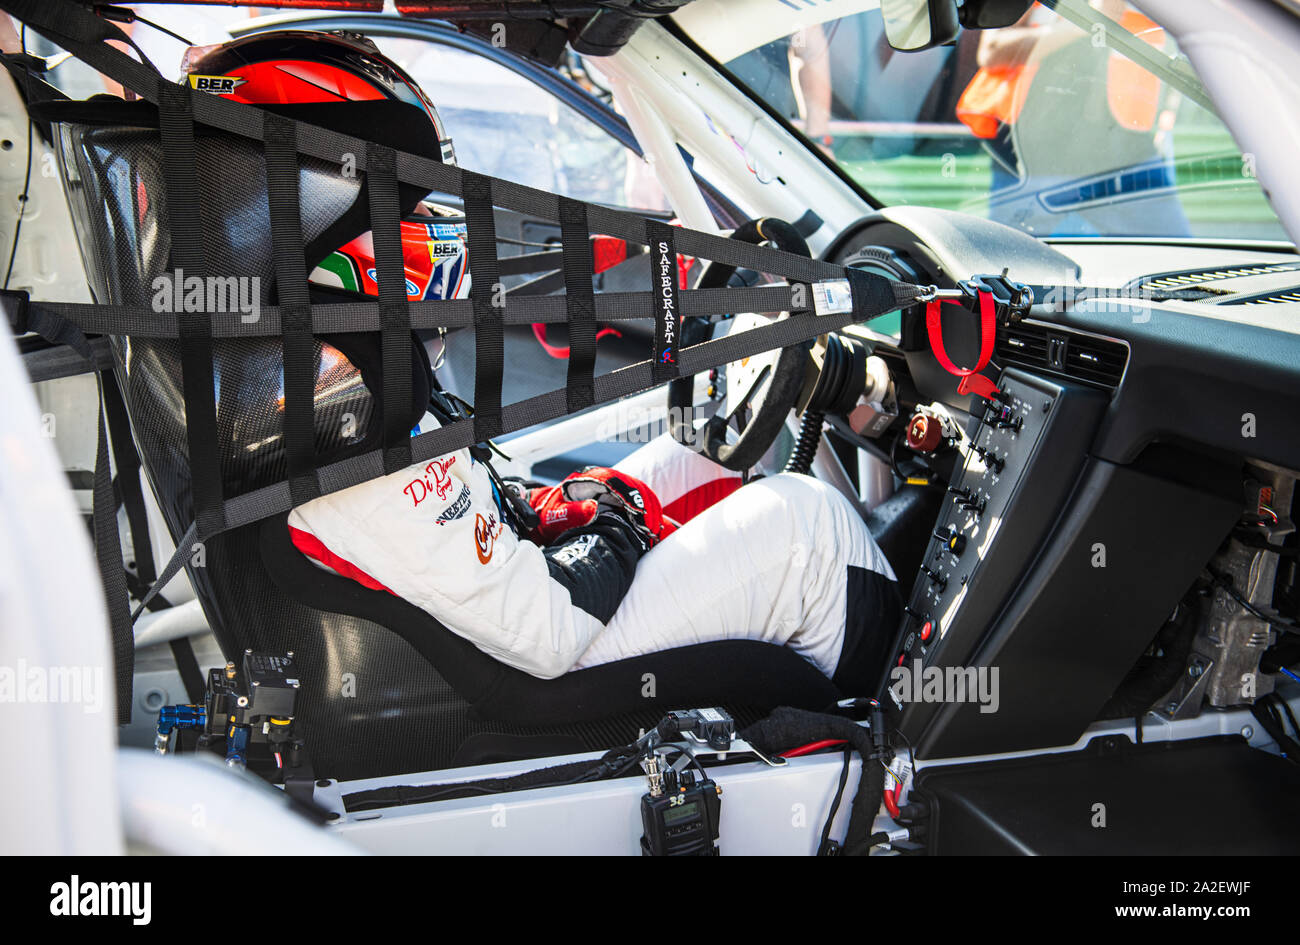 Vallelunga, Italy september 14 2019. Touring racing car cockpit with race driver sitting ready for the race side view Stock Photo